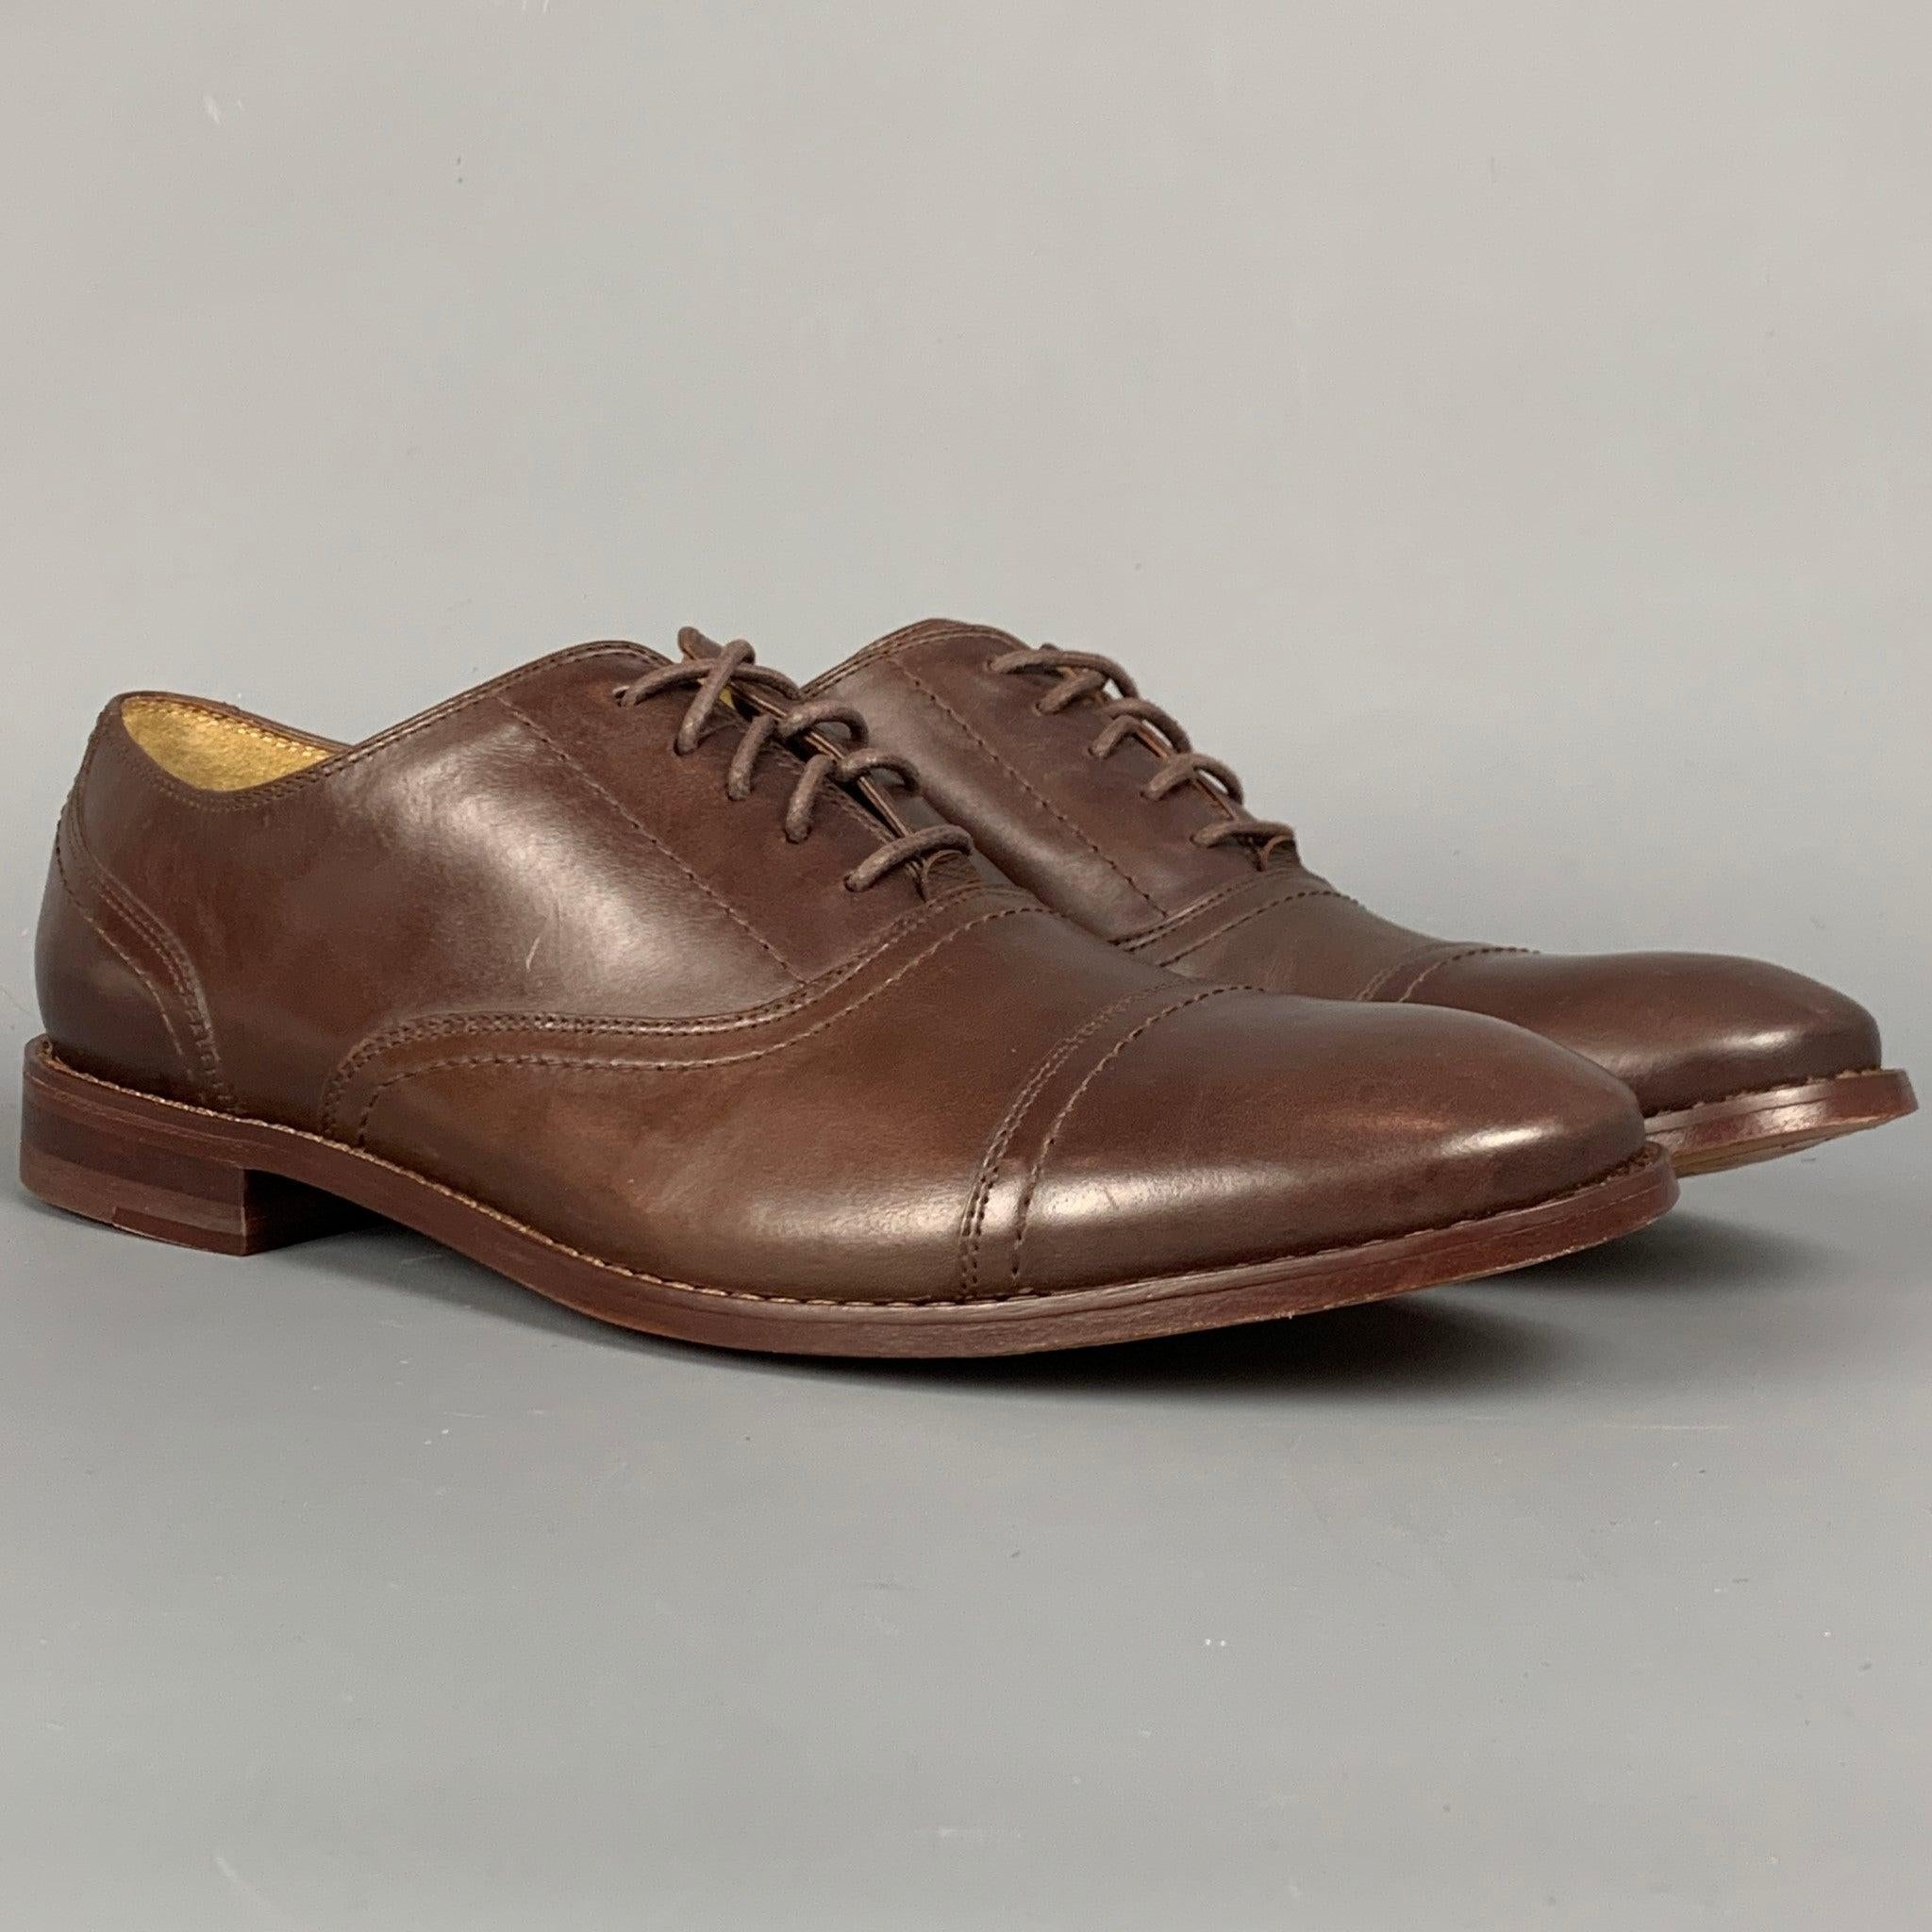 MICHAEL BASTIAN lace up shoes comes in a brown leather featuring a cap toe, top stitching, wooden sole, and a lace up closure.
New With Box. 

Marked:   10Outsole: 4 inches  x 12 inches 
  
  
 
Reference: 109070
Category: Lace Up Shoes
More